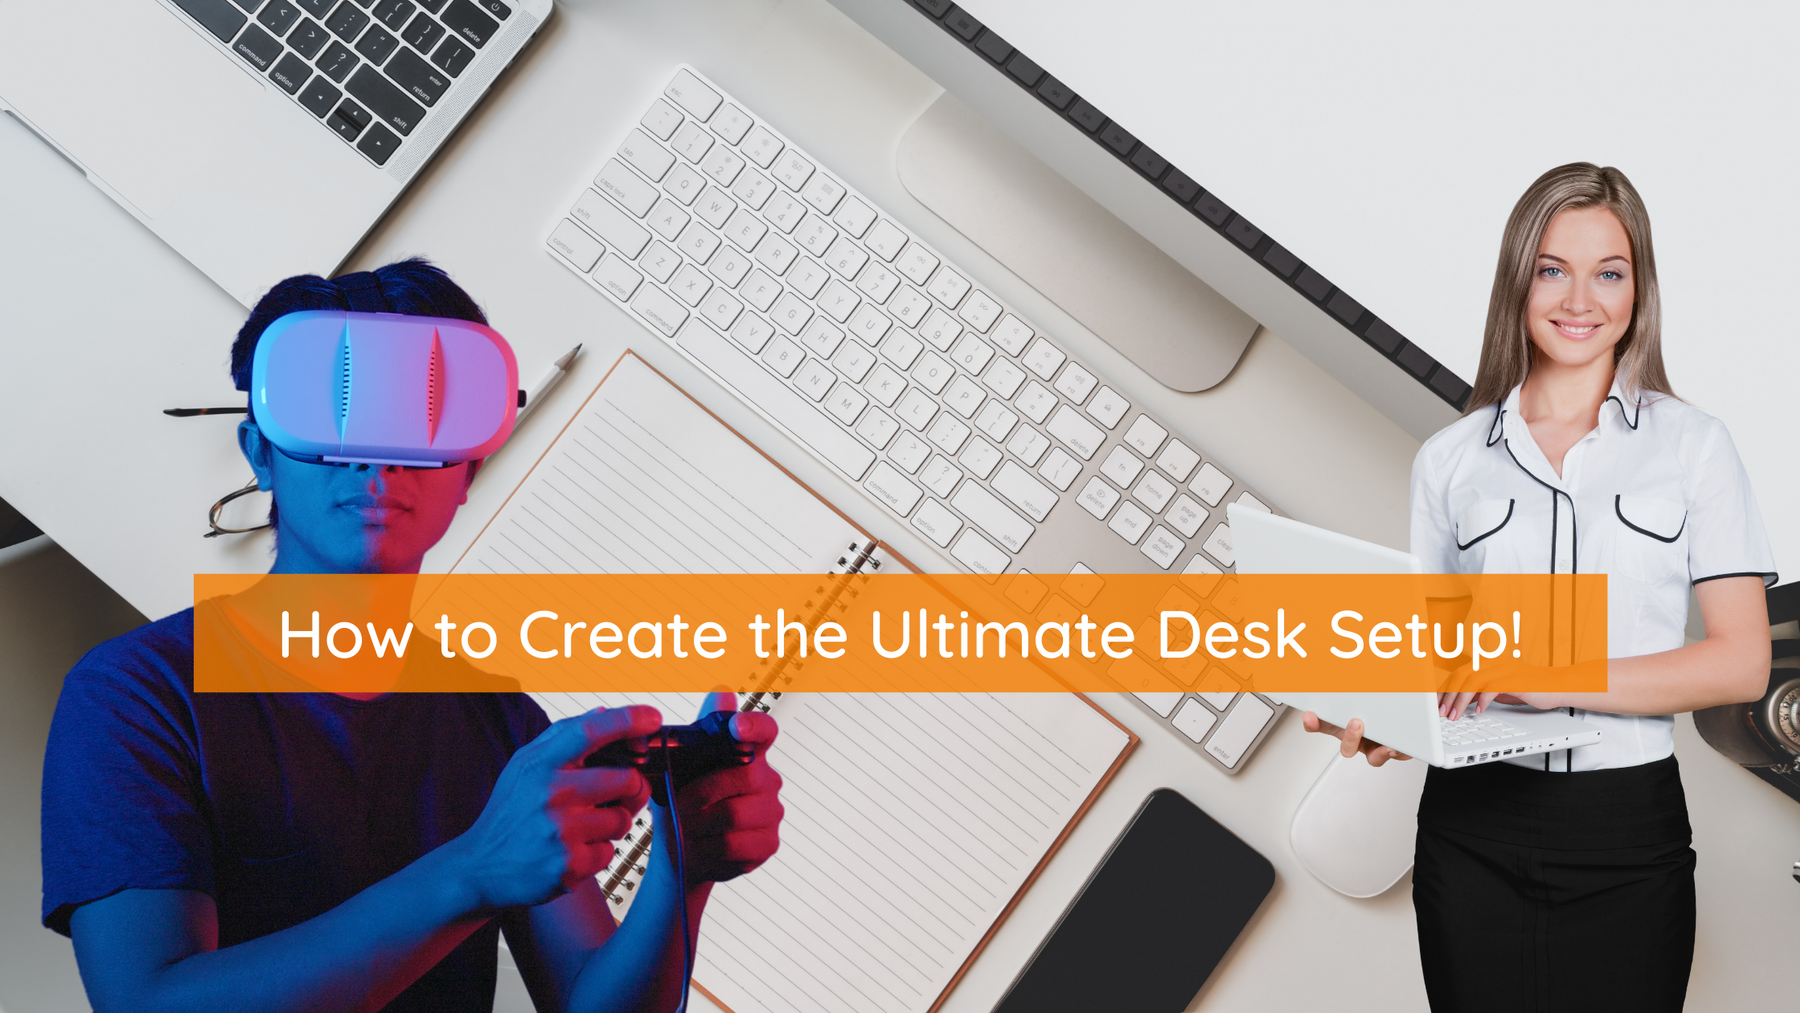 How to Create the Ultimate Desk Setup! - Mainland Furniture NZ